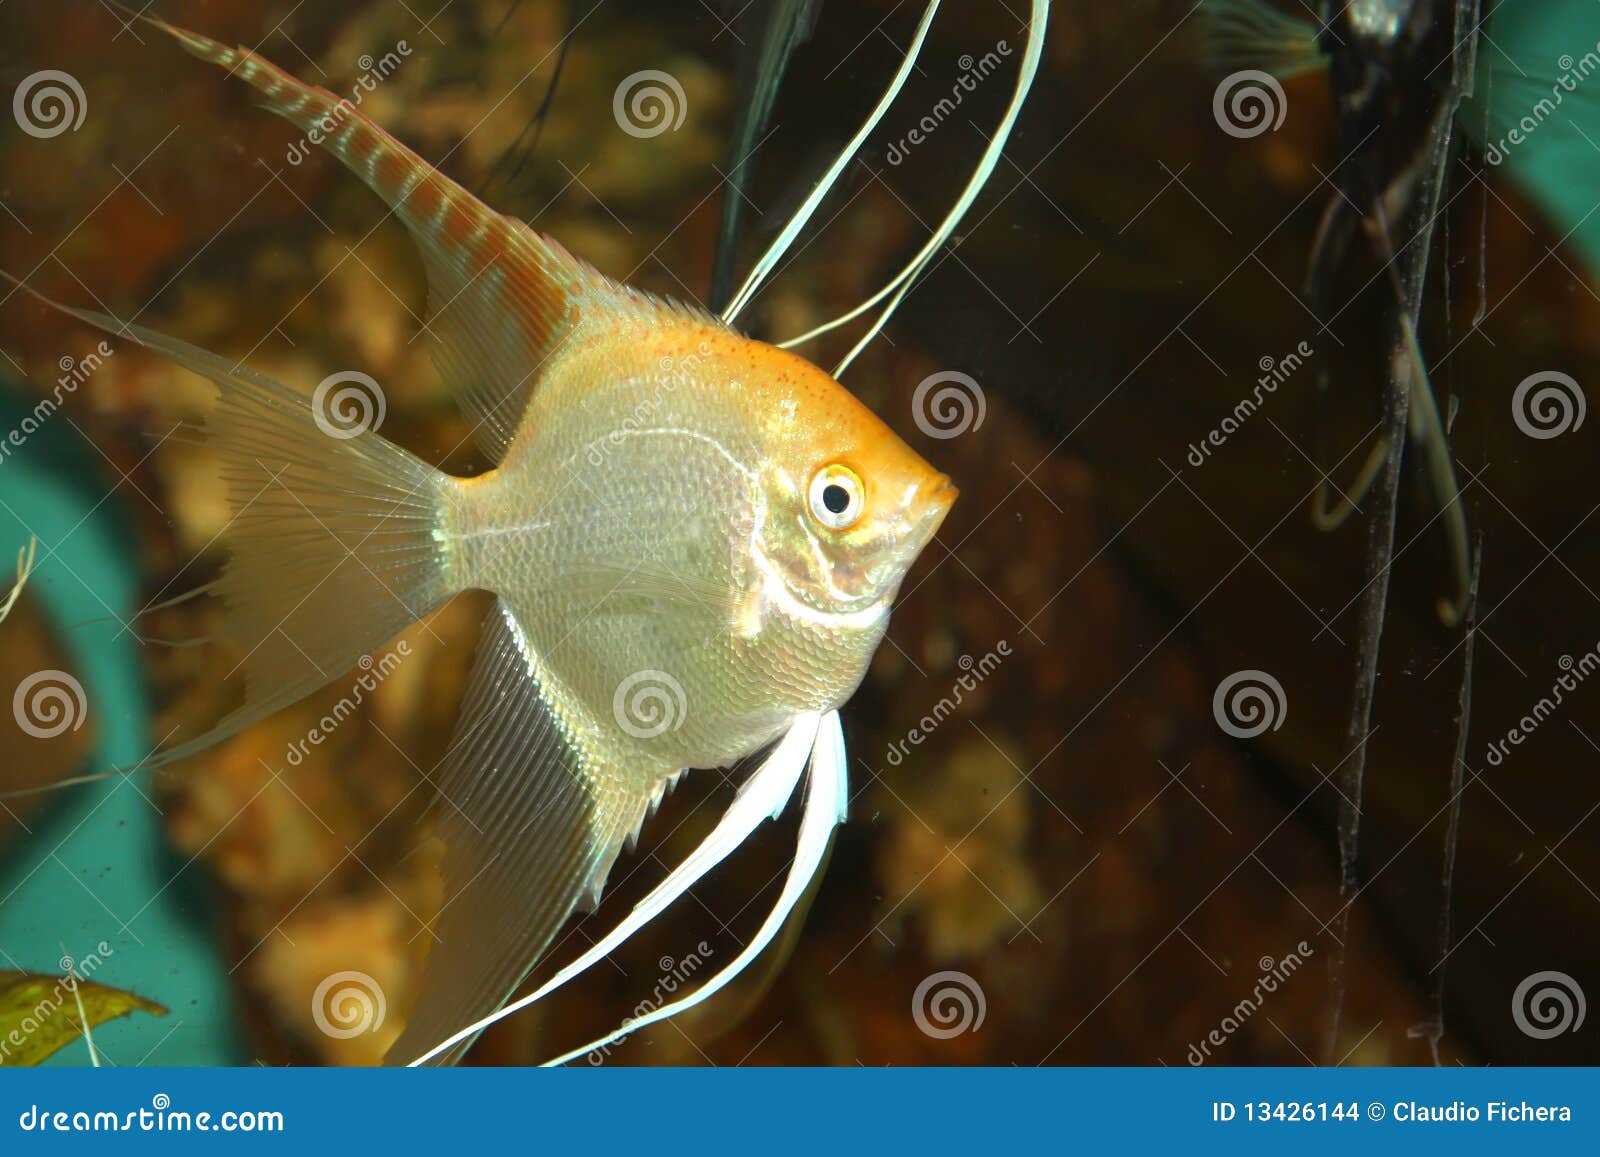 angel fish in the fishbowl 1